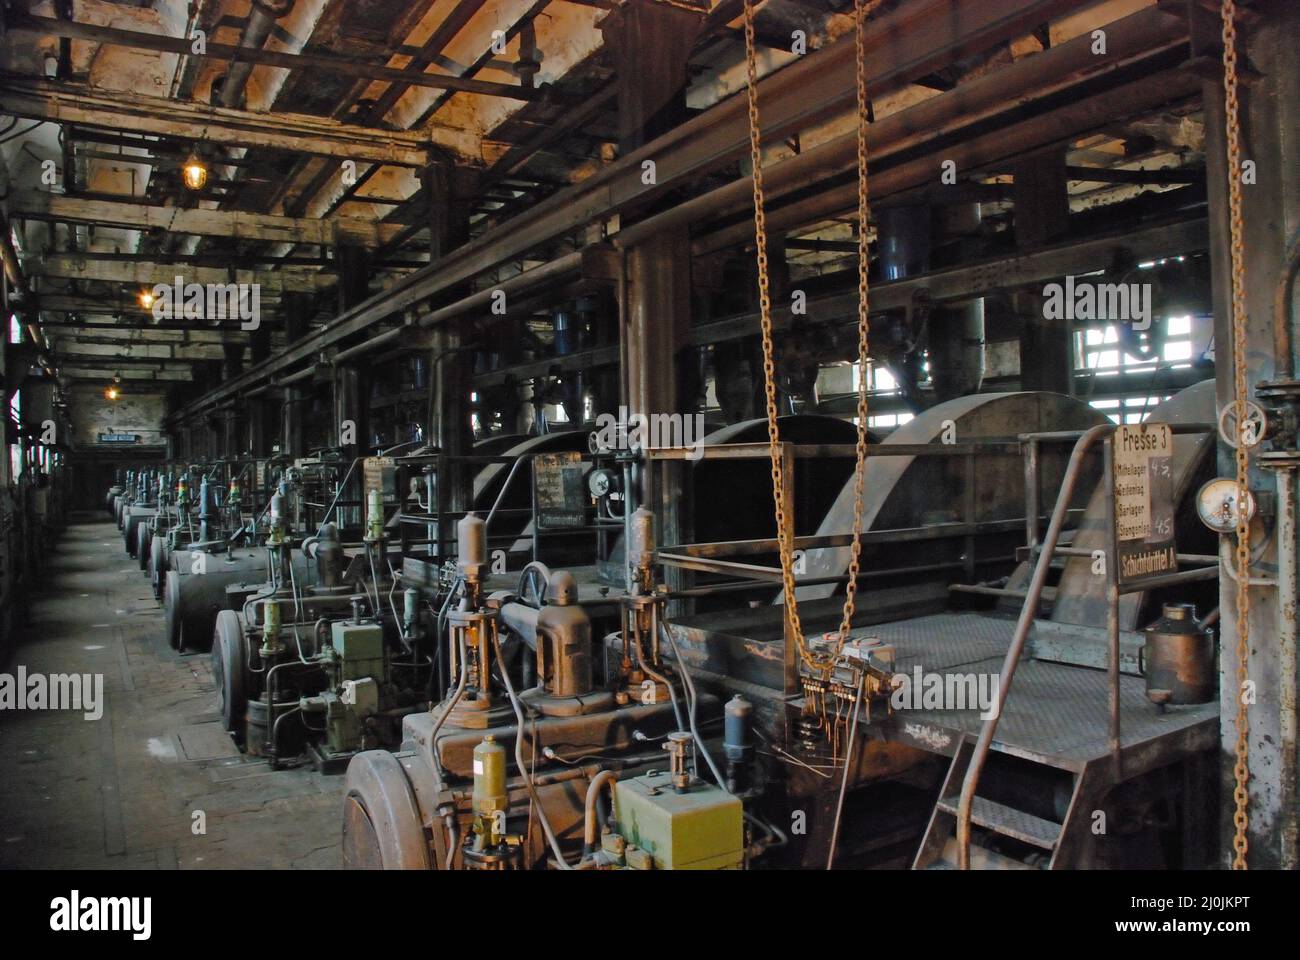 Interior view of old factory building Stock Photo